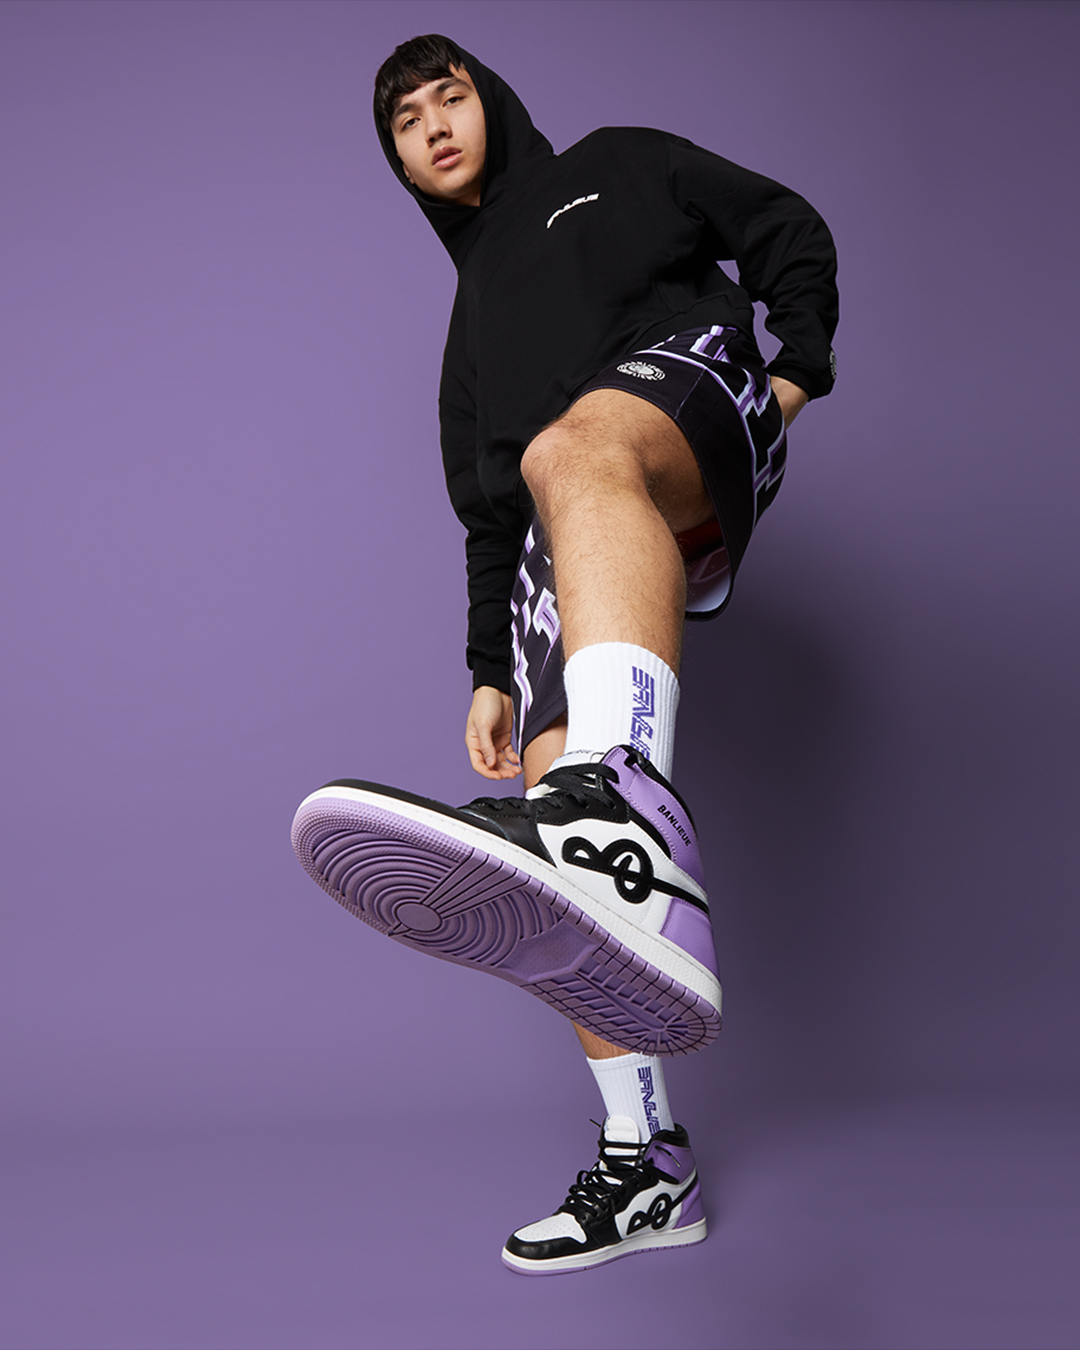 A male fashion model wearing a black and purple outfit, captured by I Heart Studios for eCommerce model fashion photography.